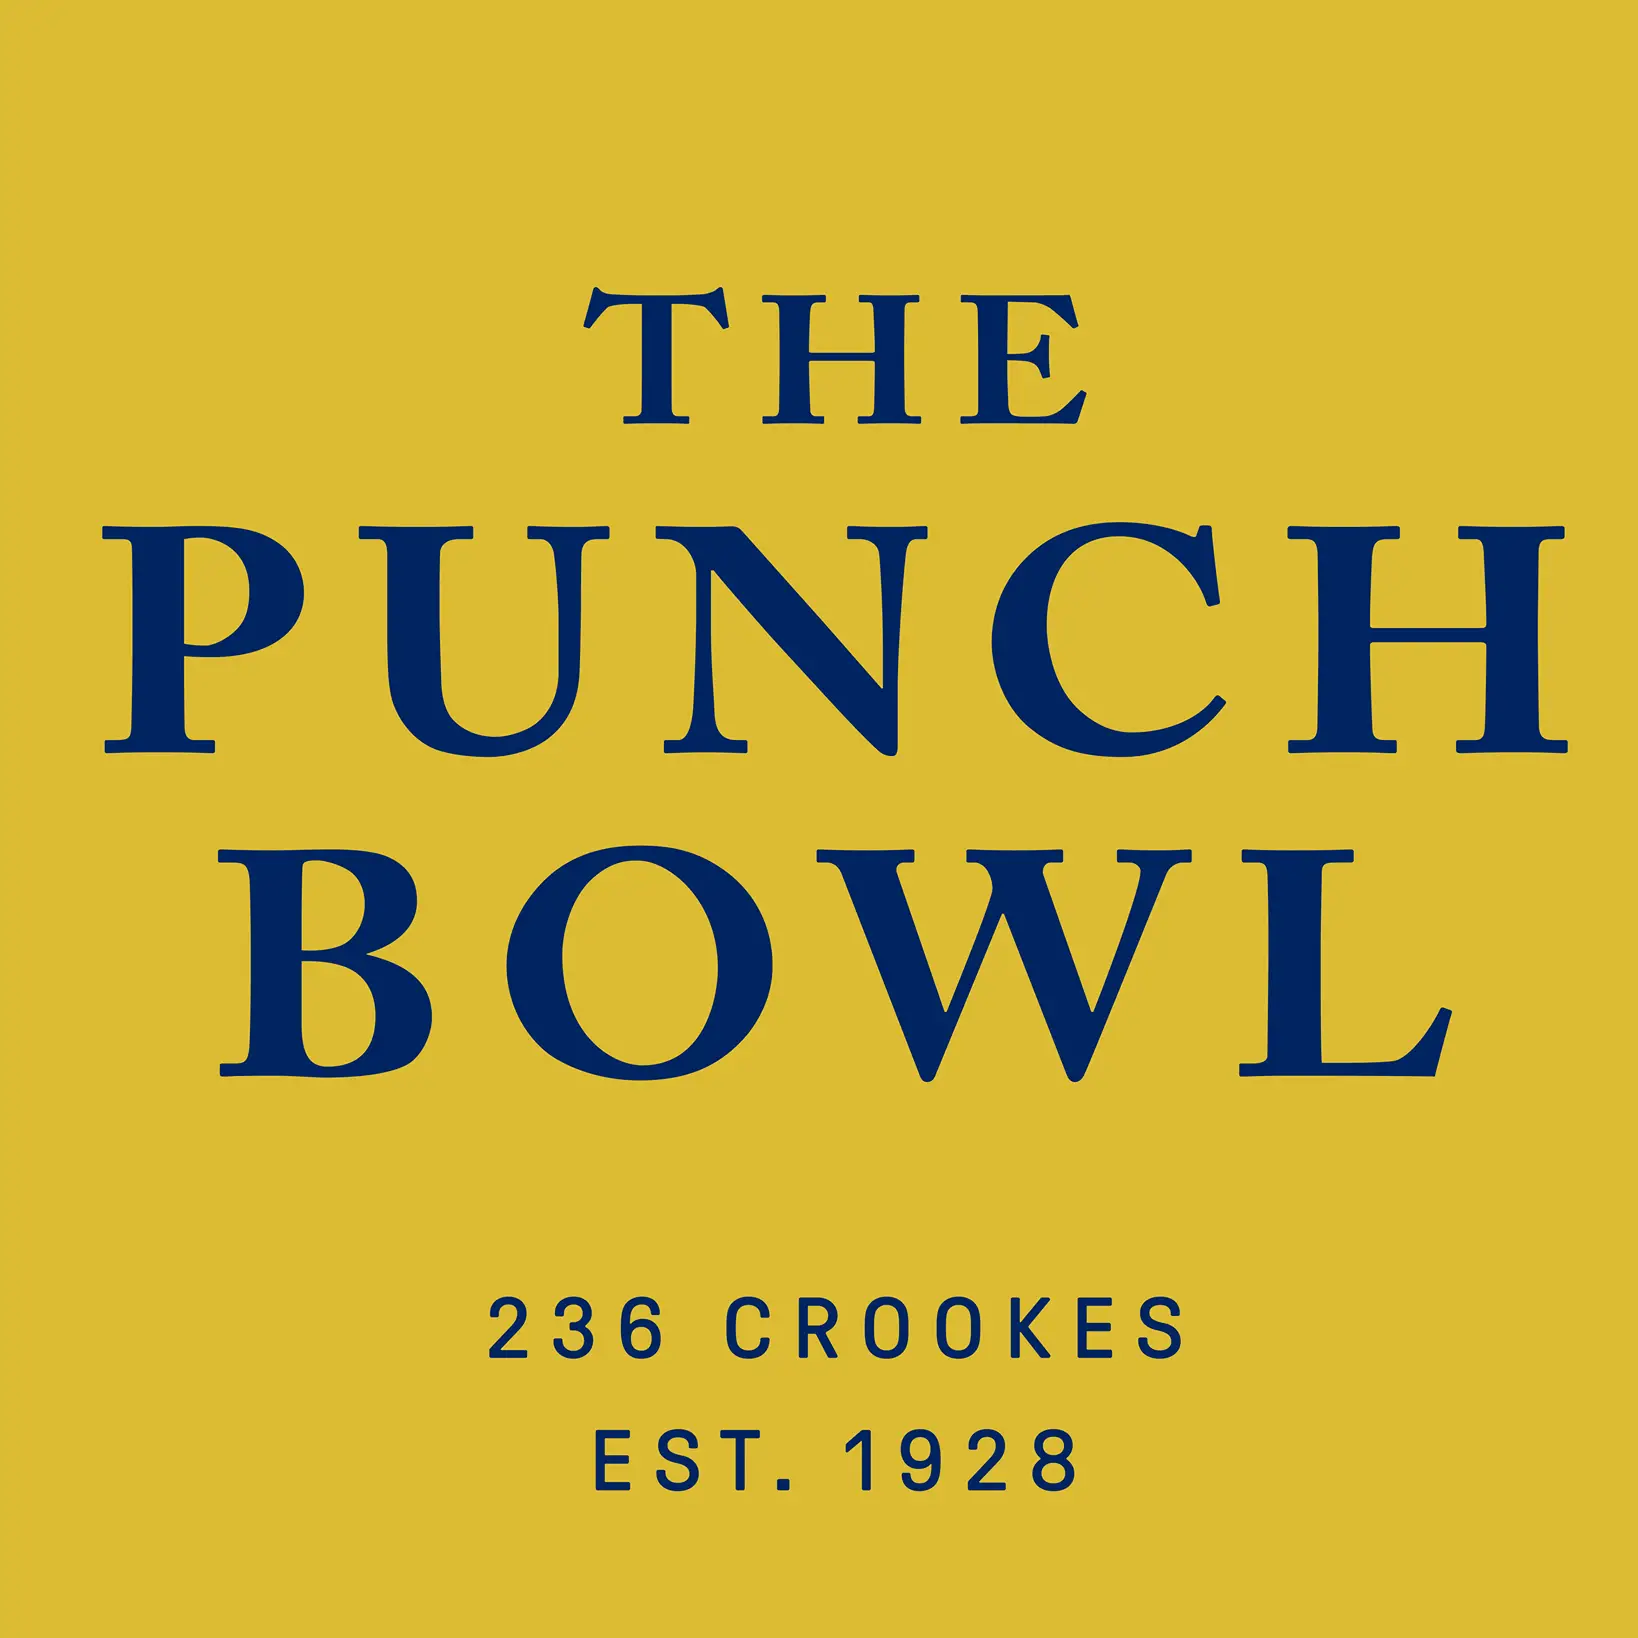 Punch Bowl Crookes